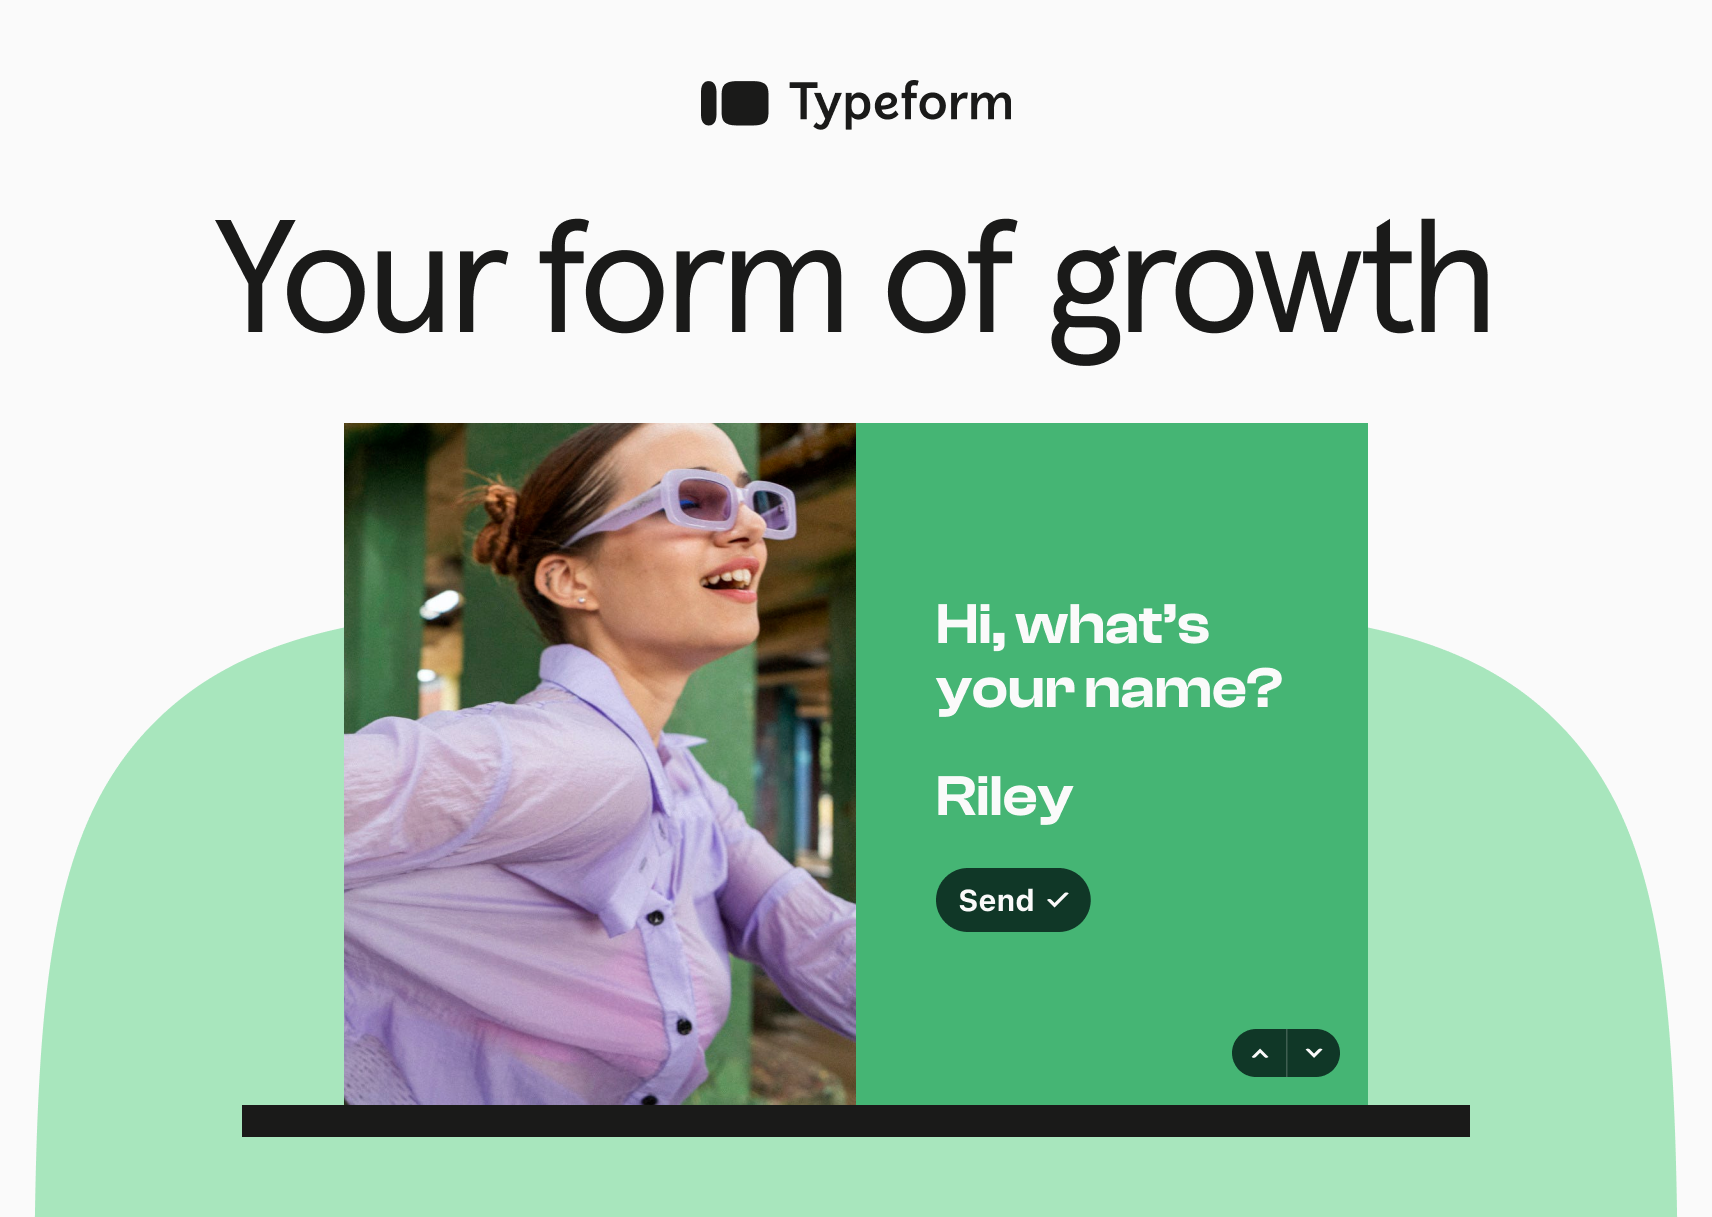 Typeform 101: All About Typeform's Forms by Formester!